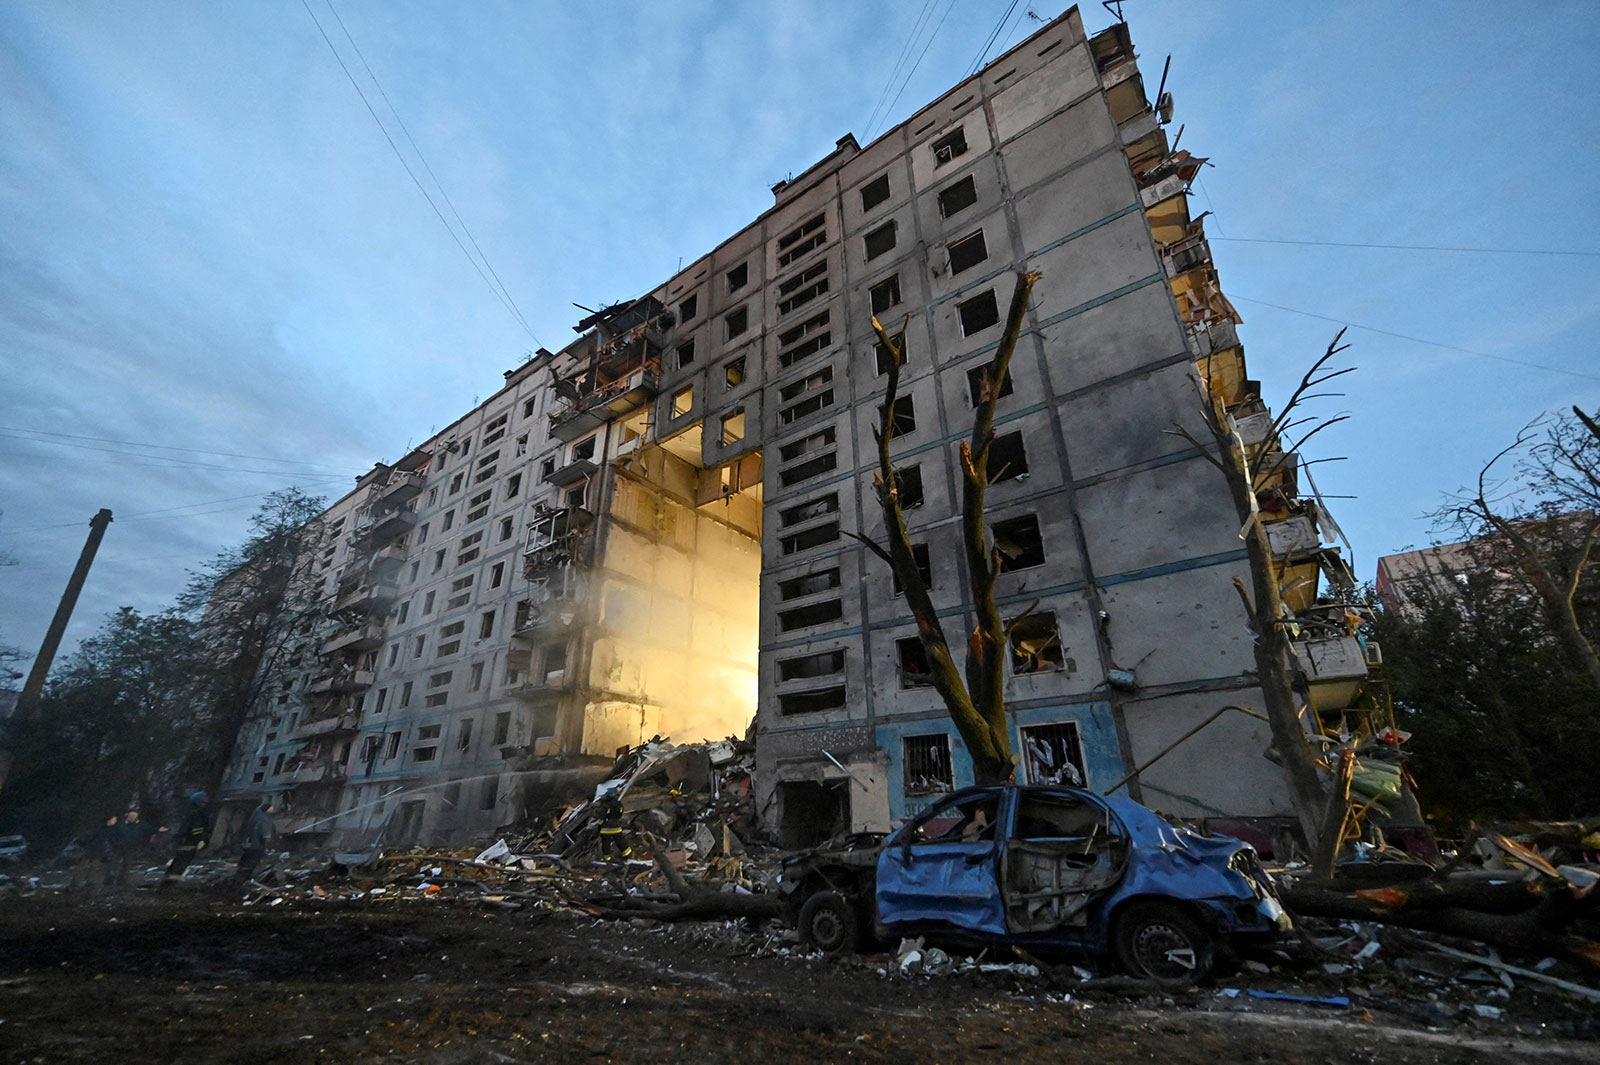 Damage to a residential building is seen after a rocket attack in Zaporizhzhia, Ukraine, on October 9.